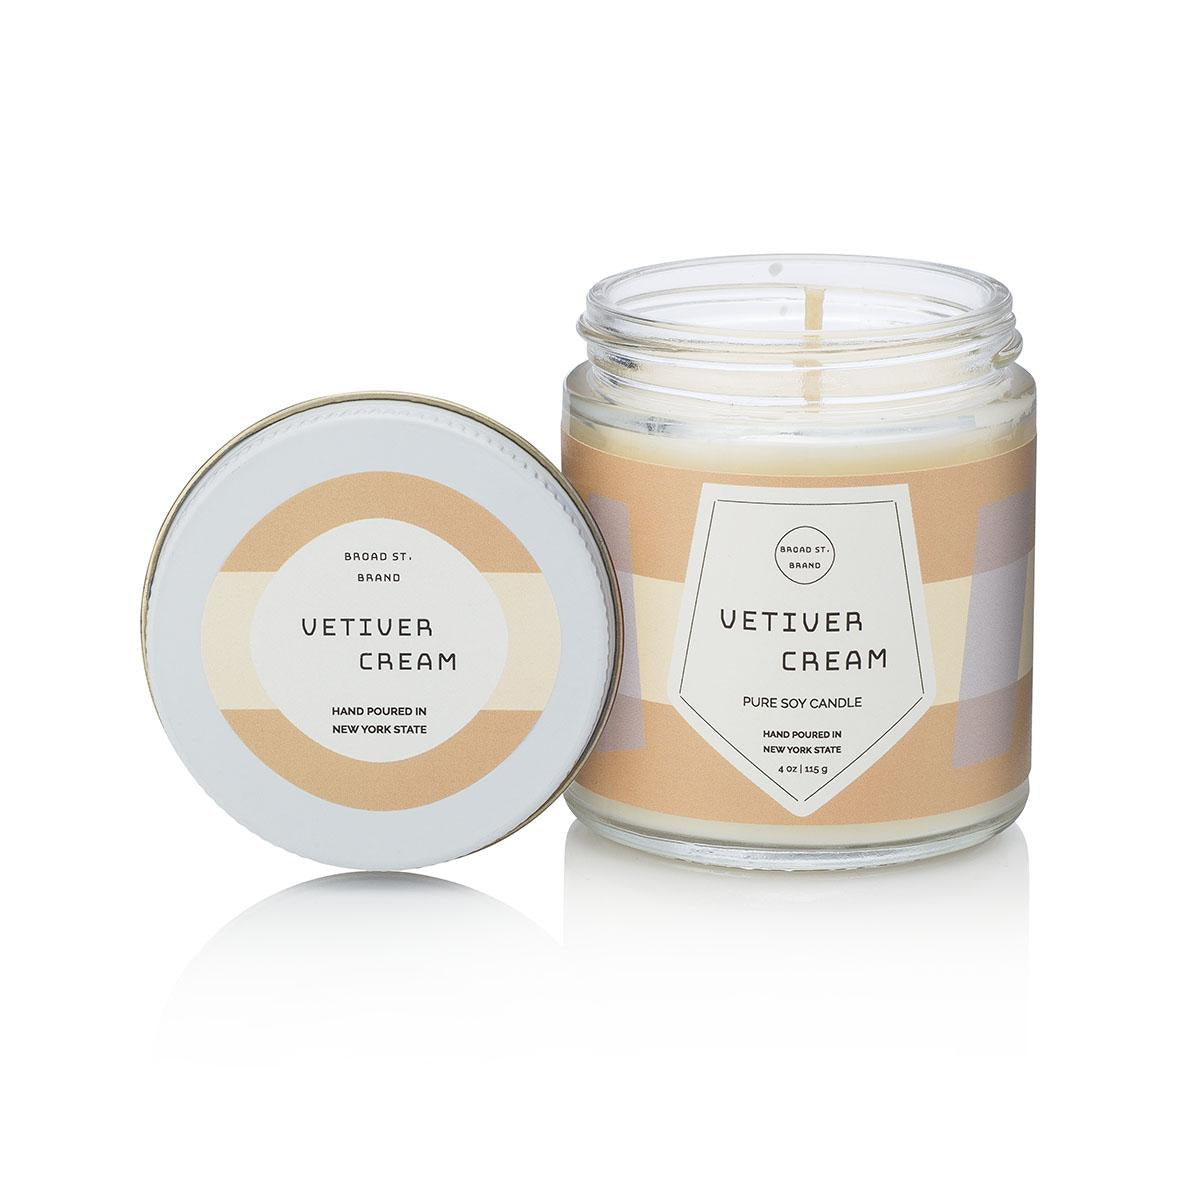 Primary image of Vetiver Cream Pure Soy Candle